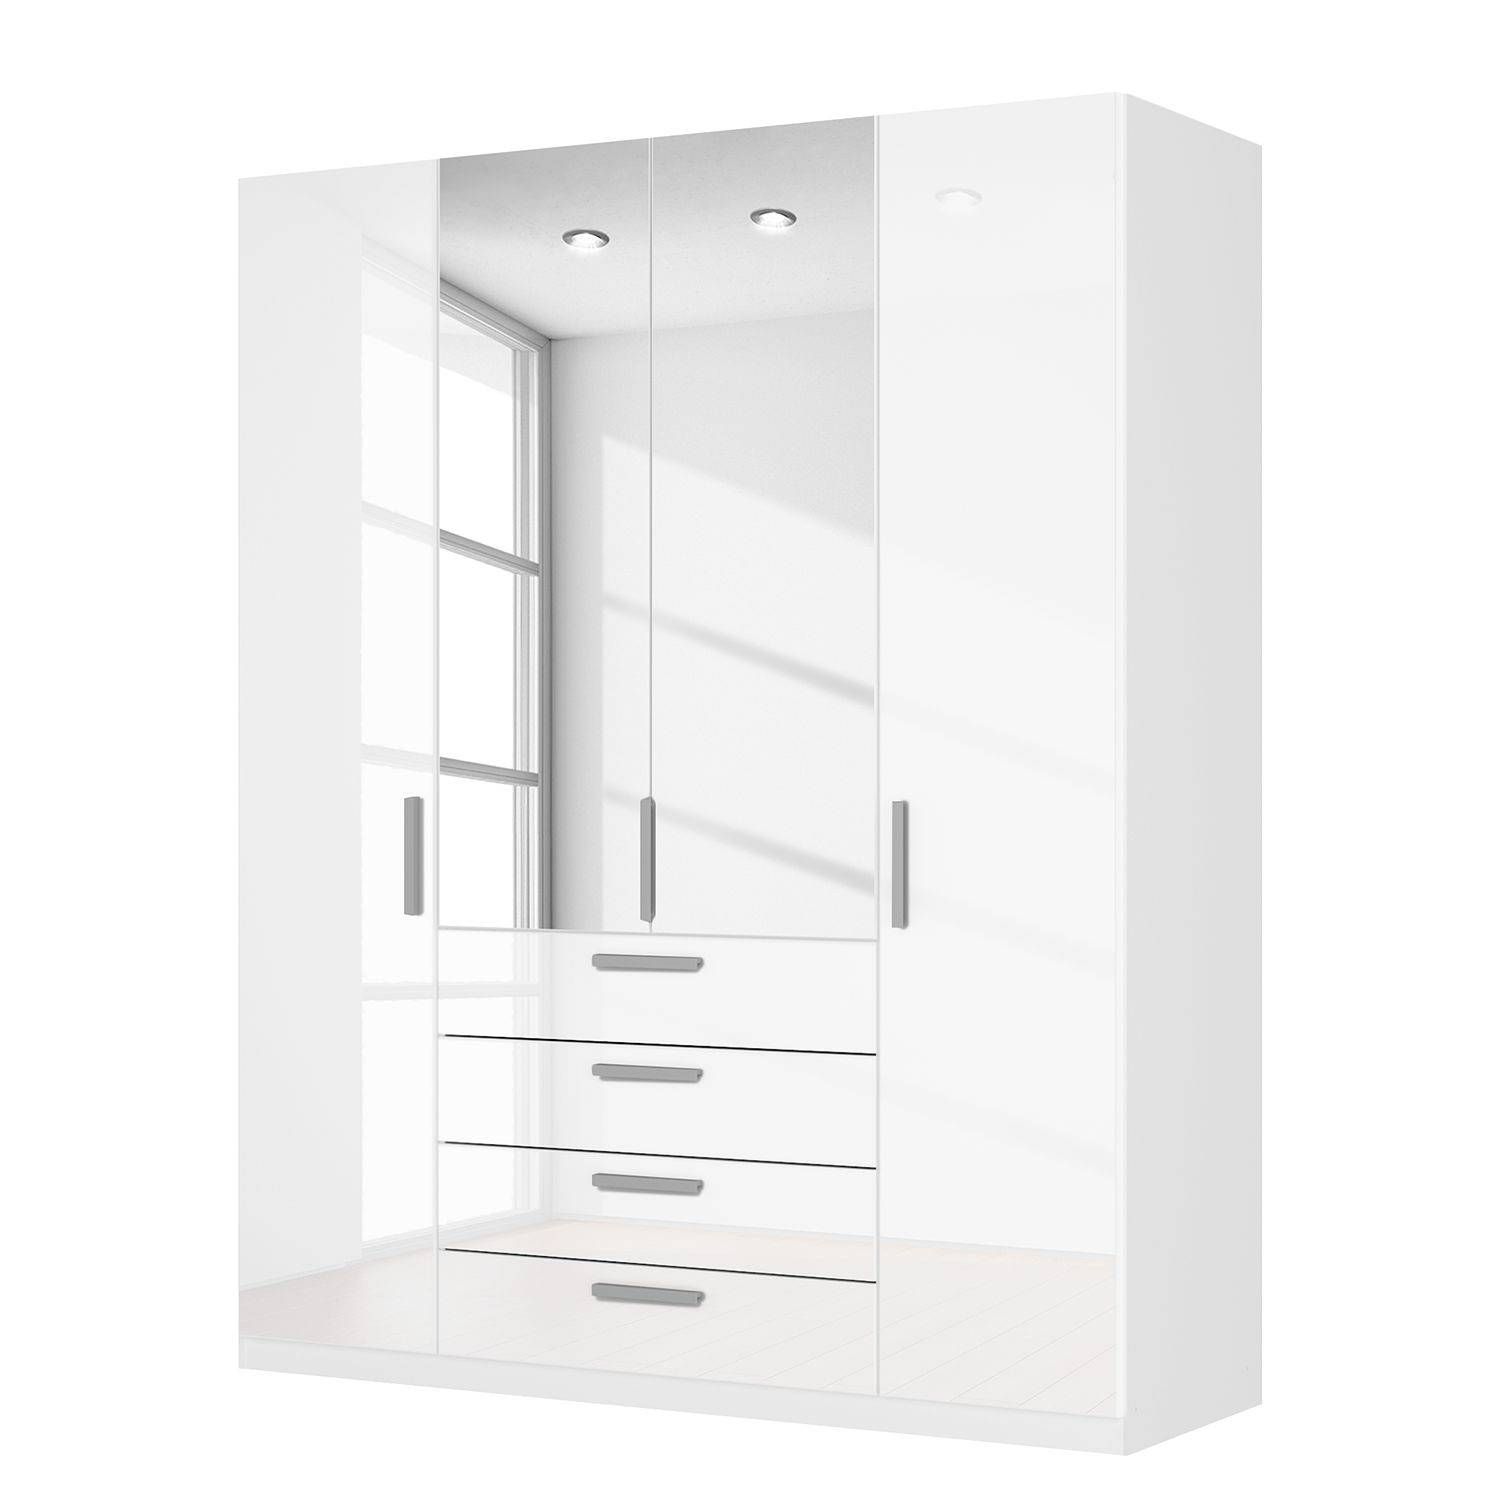 High Gloss White Wardrobes With Drawers Regarding White Gloss Wardrobes (View 15 of 15)